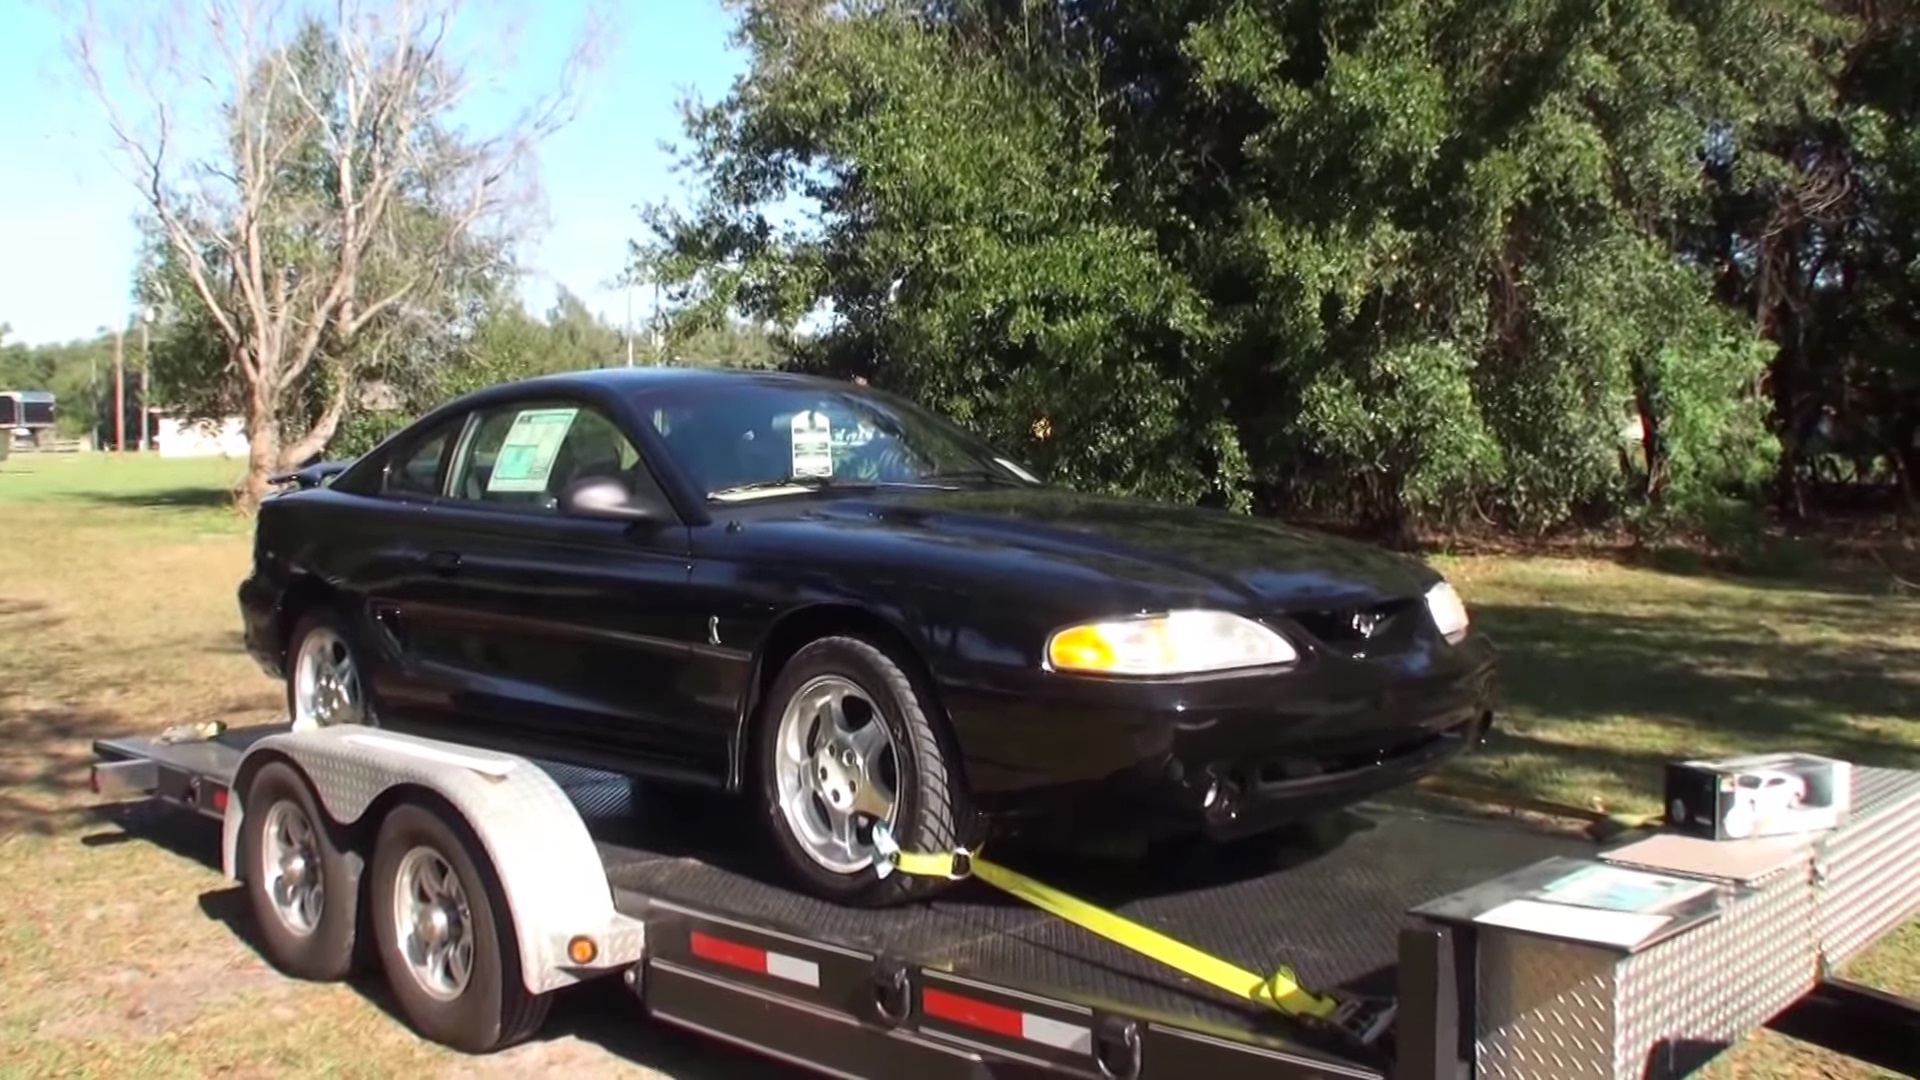 Video: Black 1995 Ford Mustang SVT Cobra With Only 104 Original Miles Walkaround